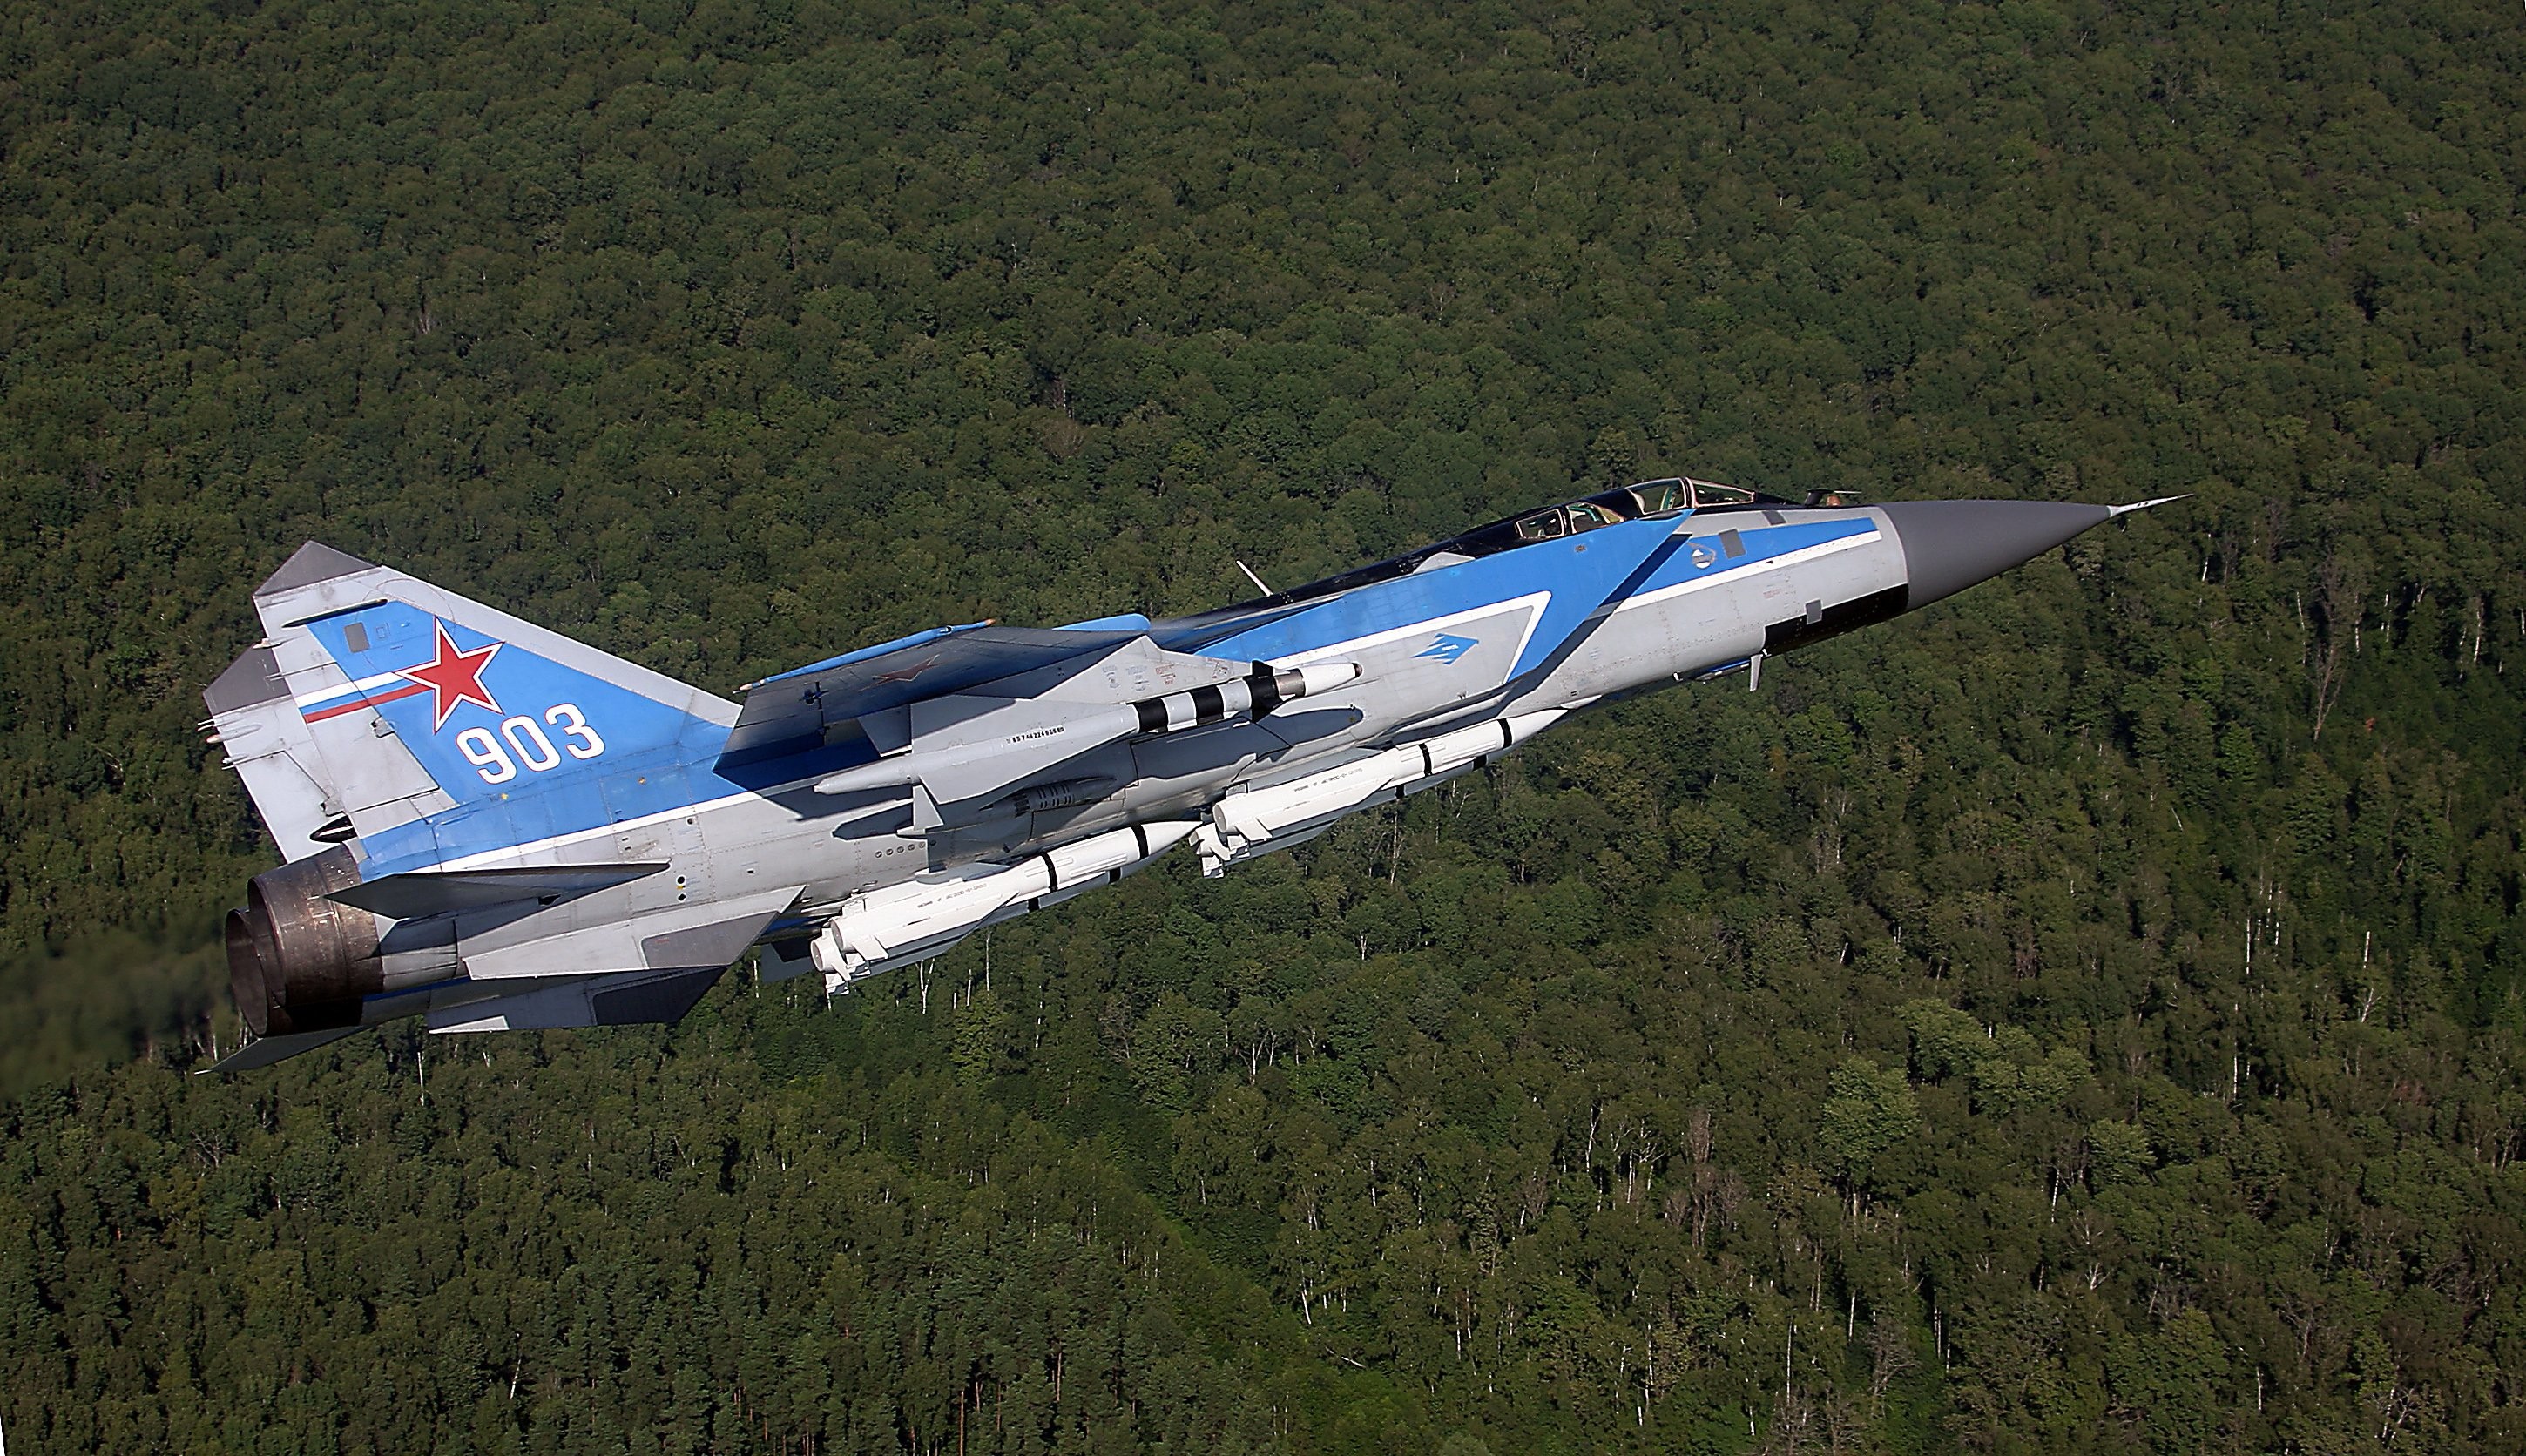 Wallpaper forest vehicle airplane military aircraft Sukhoi 2900x1672